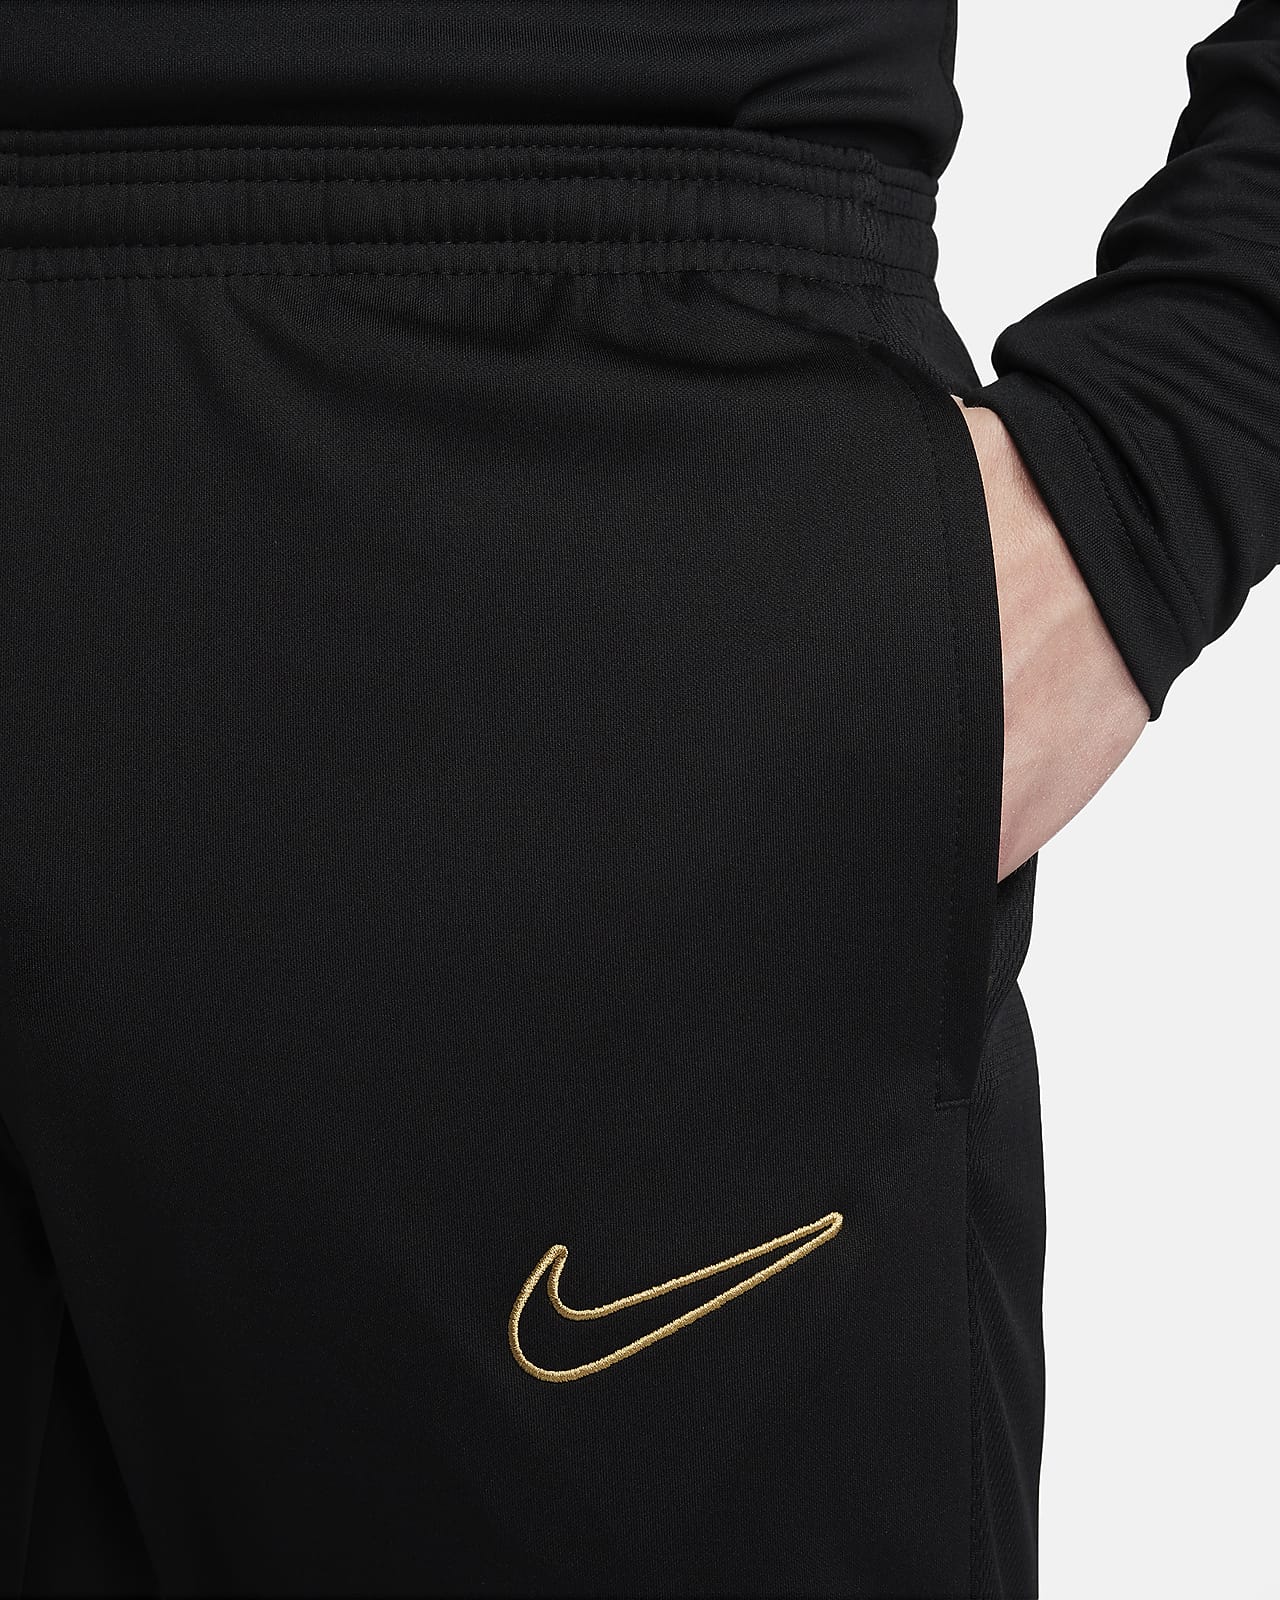 Nike, Therma-FIT Academy Men's Soccer Pants